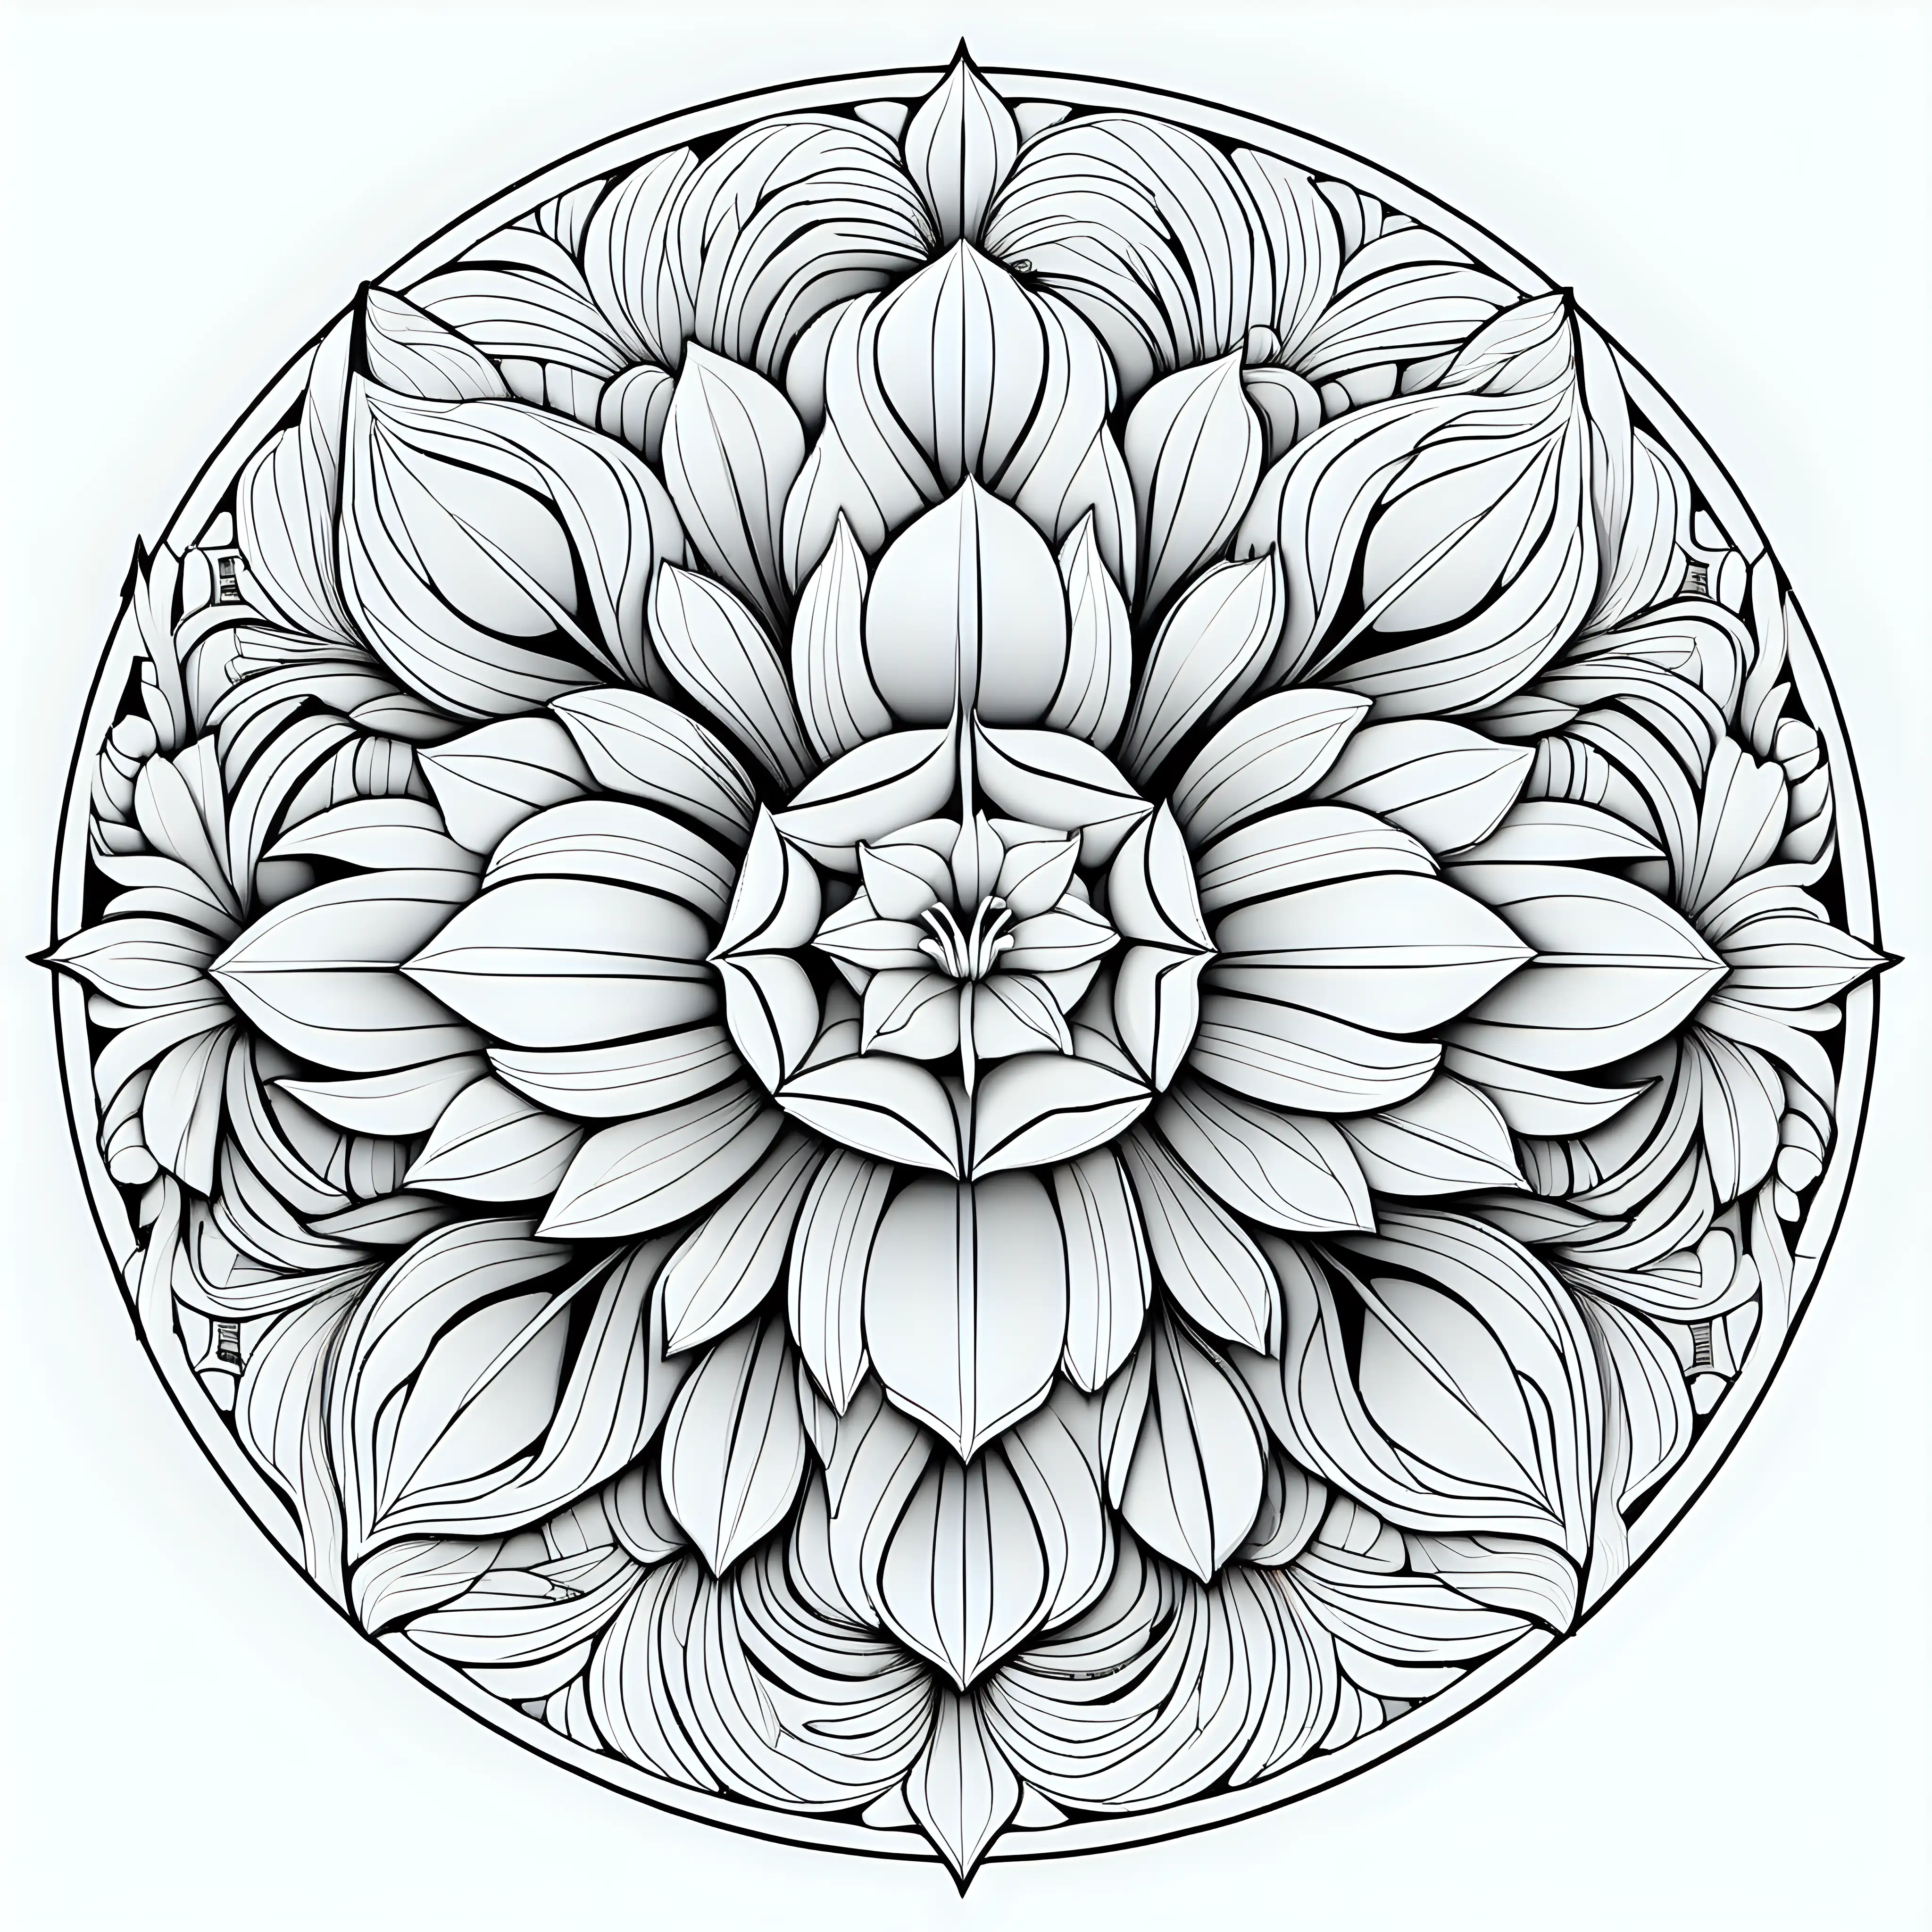 3D Mandala with Central Tulips on White Background